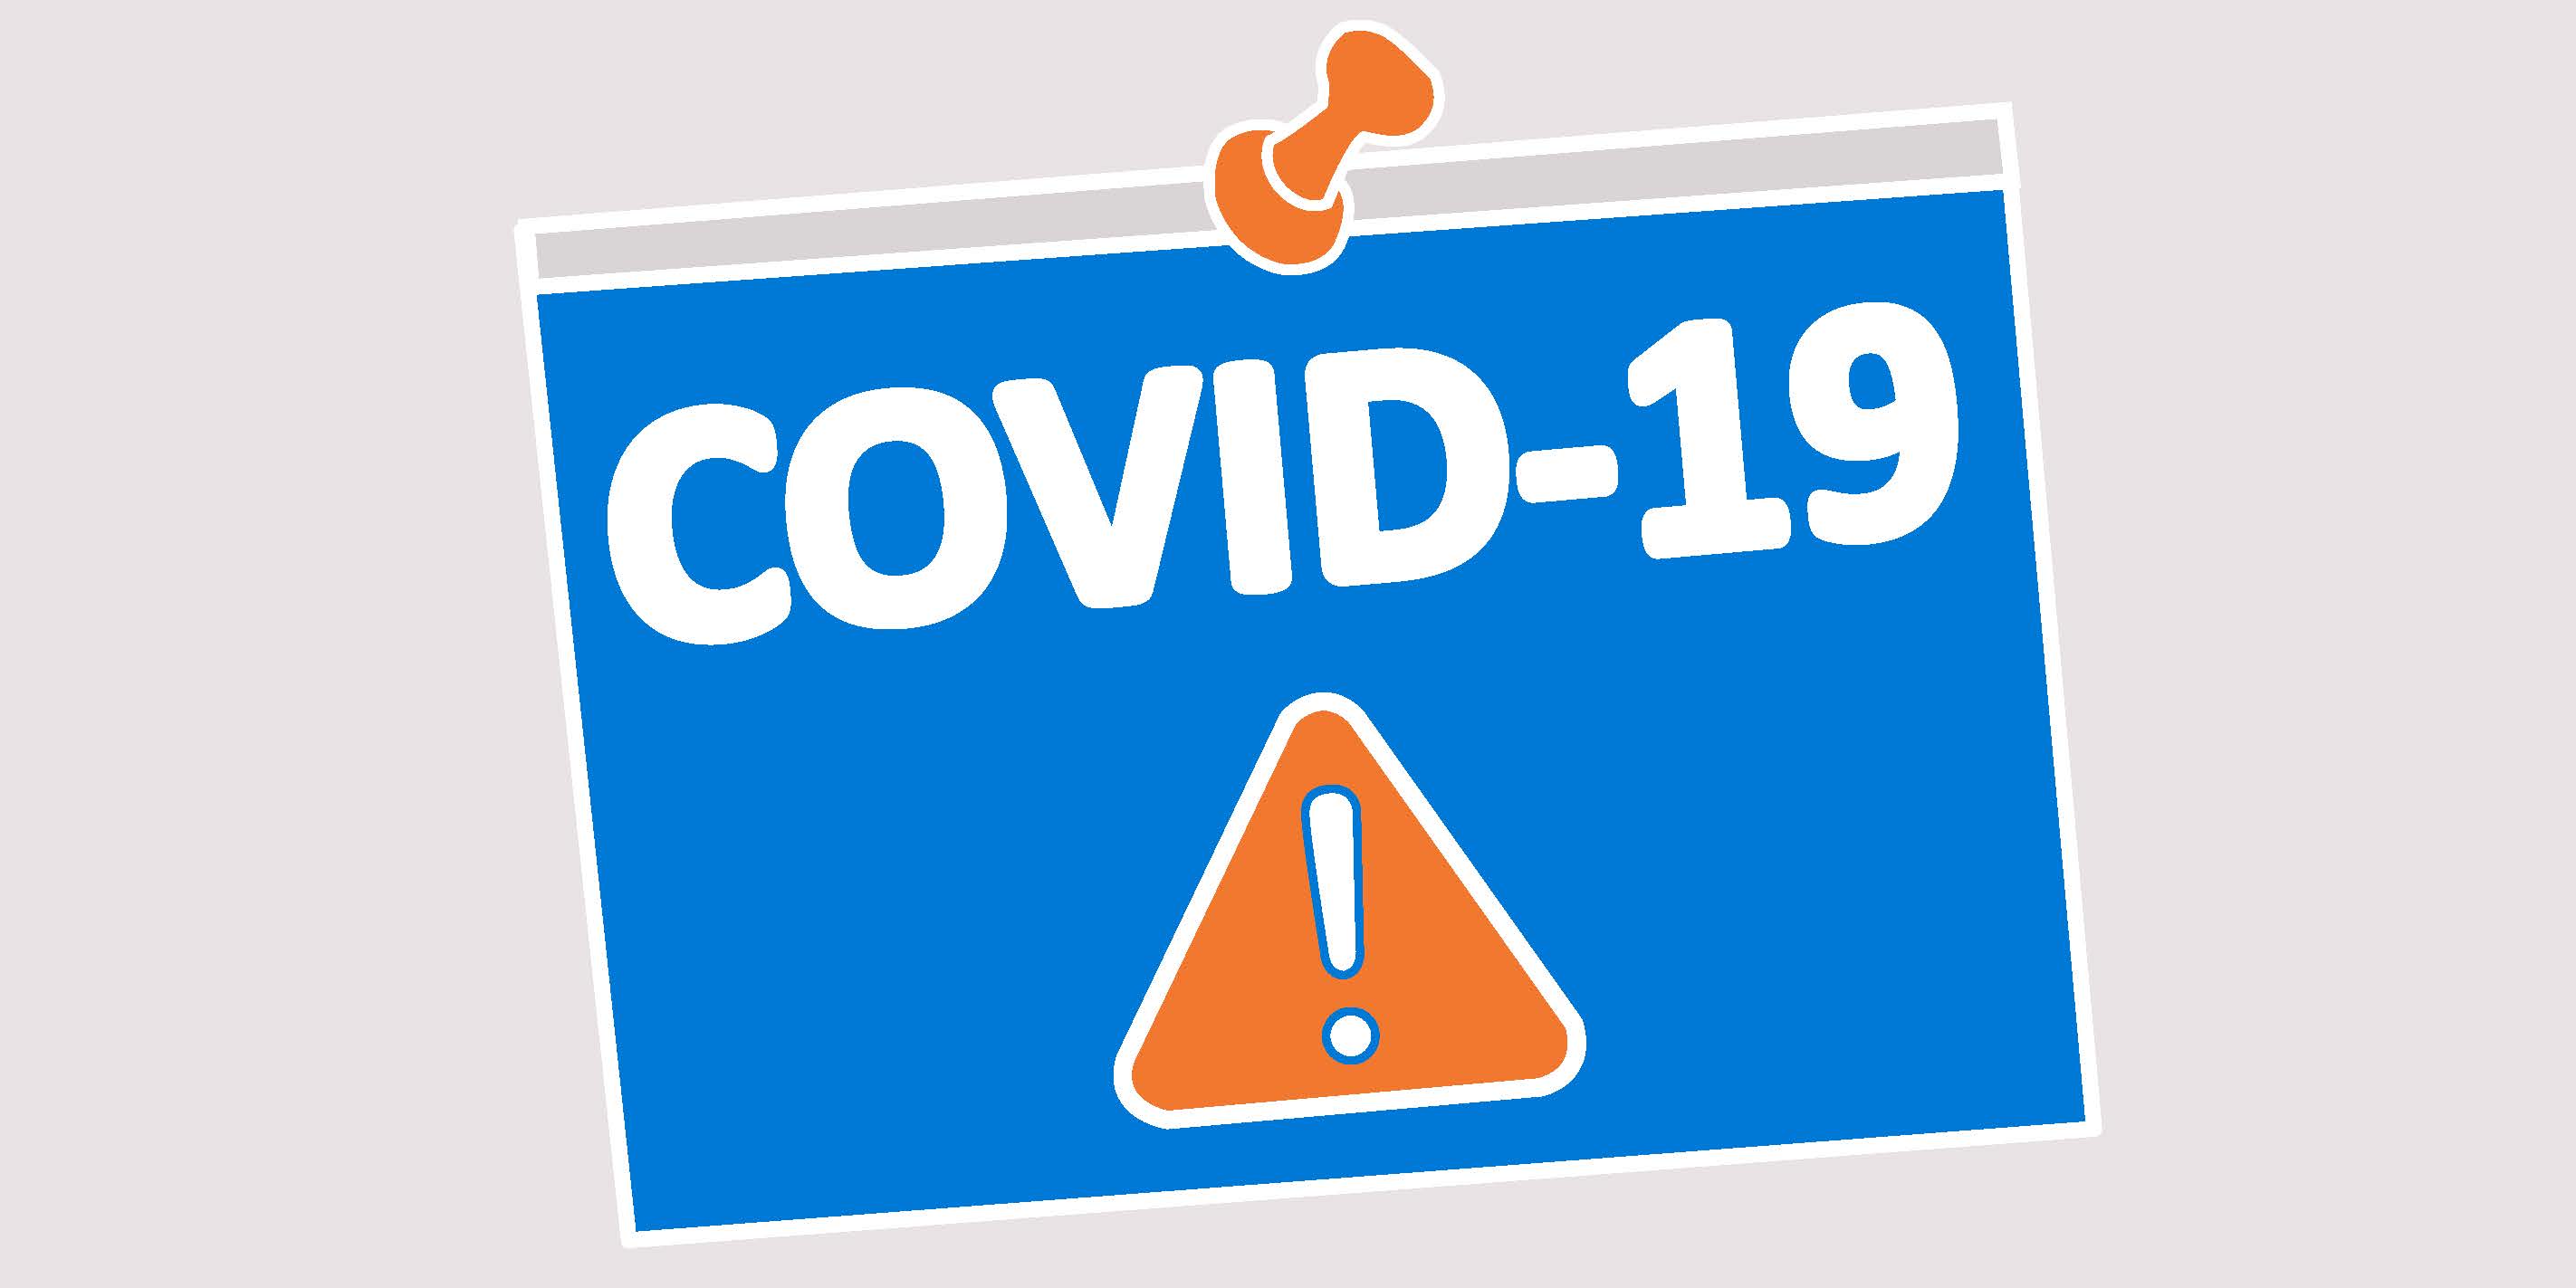 Graphic depicts a sign with an orange thumbtack icon. The sign is blue and it white letters reads: COVID-19 with an exclamation mark underneath it